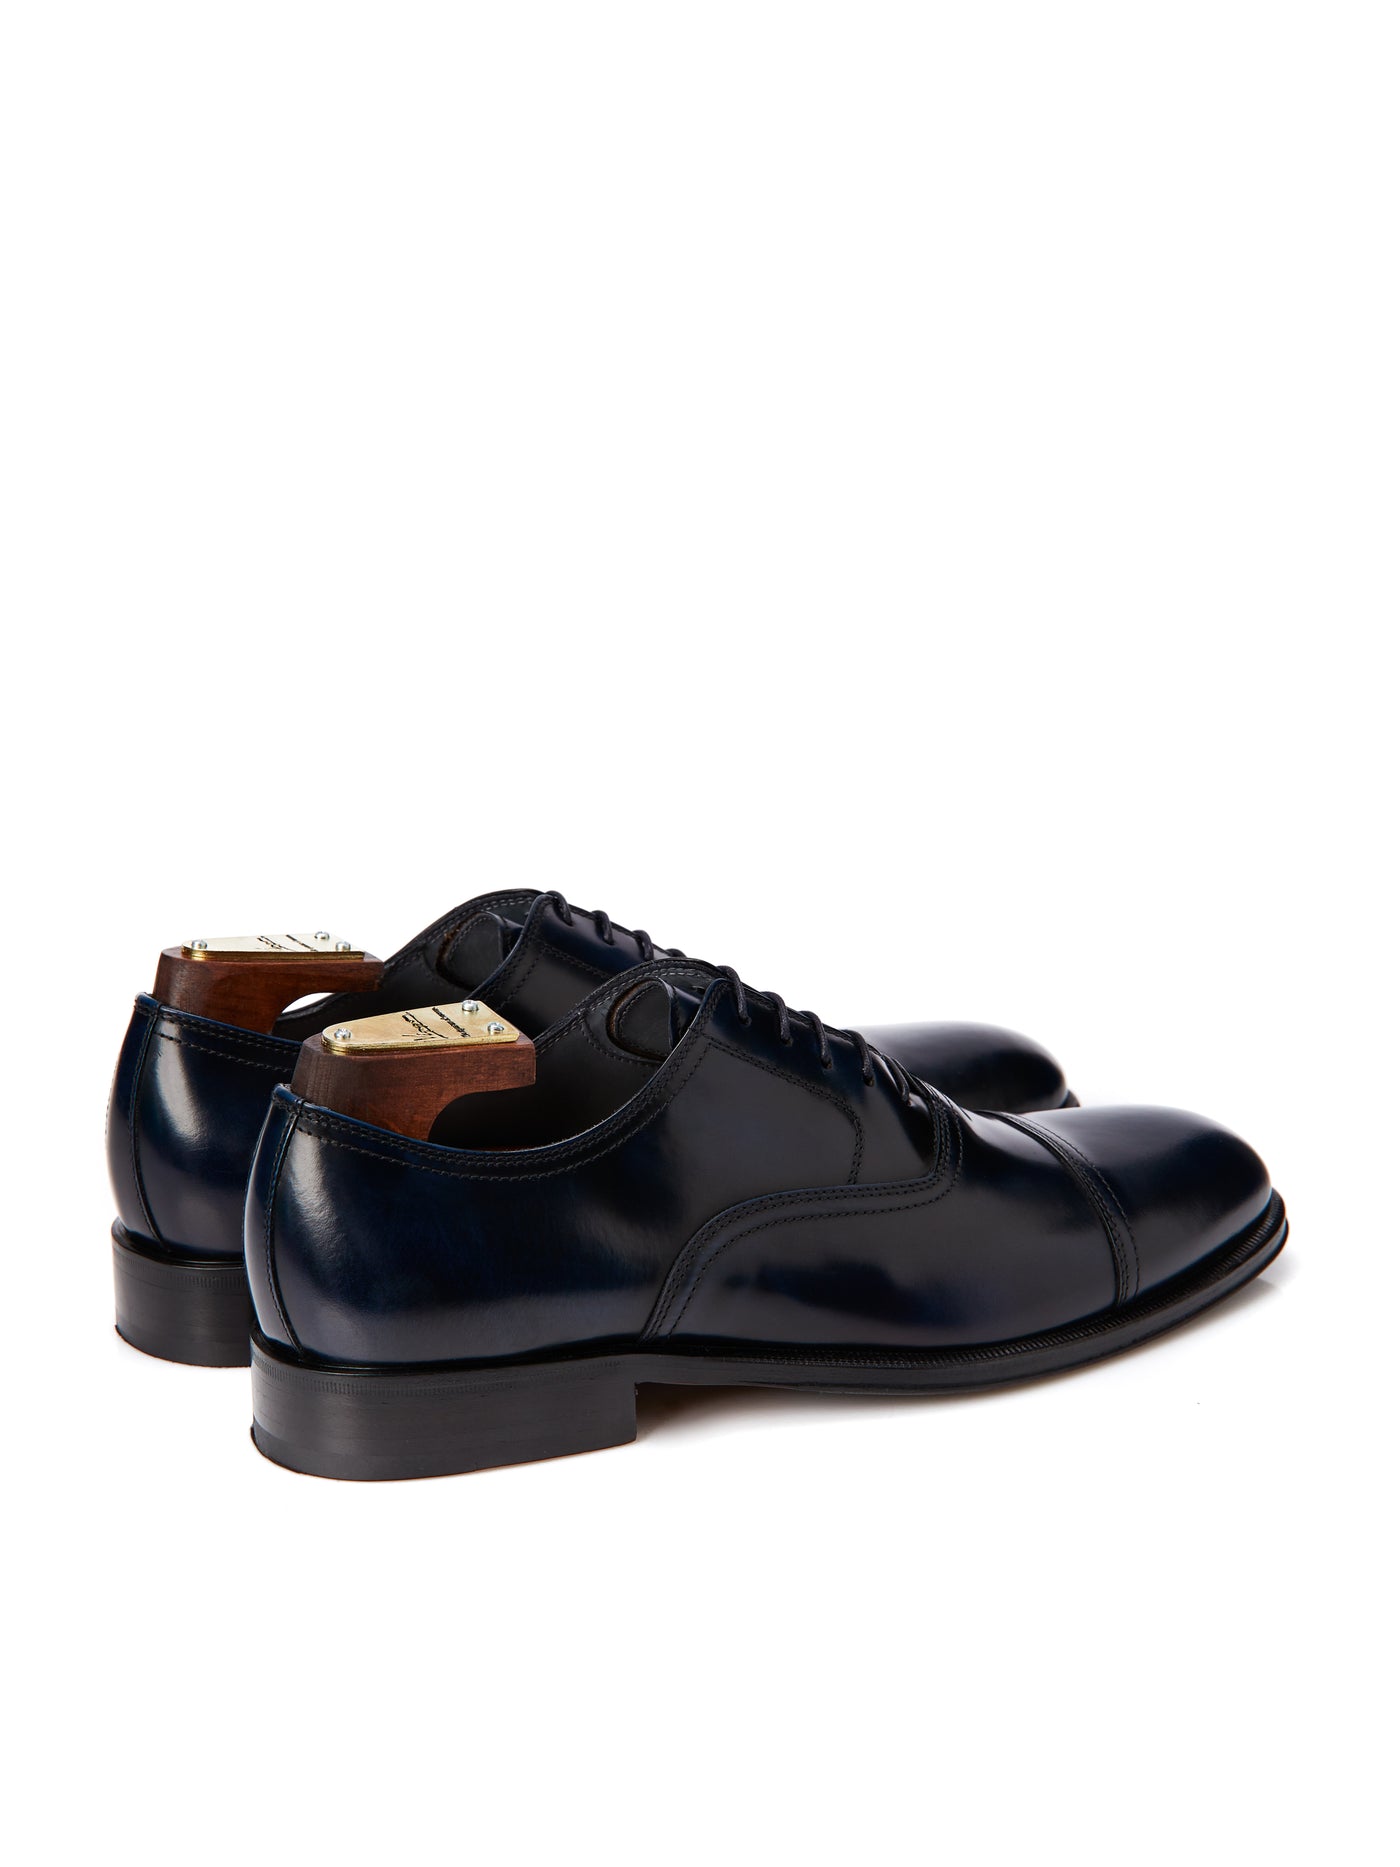 Navy oxford shoes